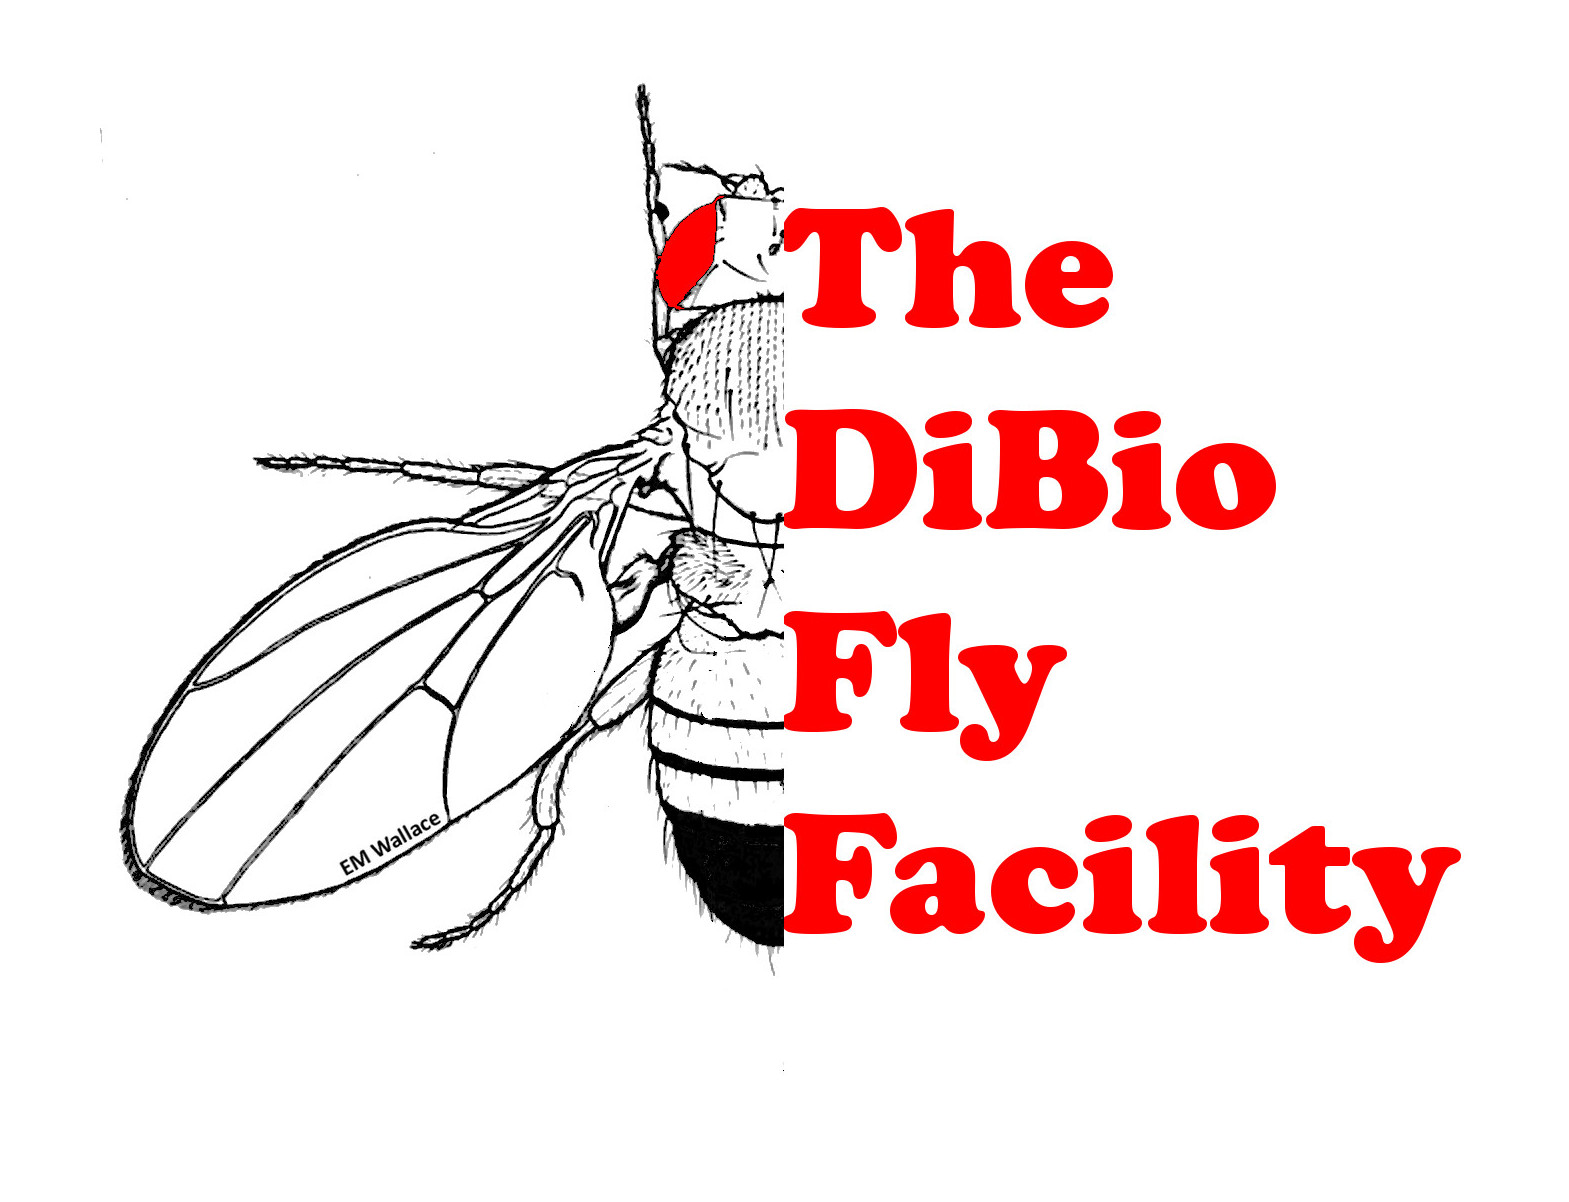 Department of Biology Fly Facility